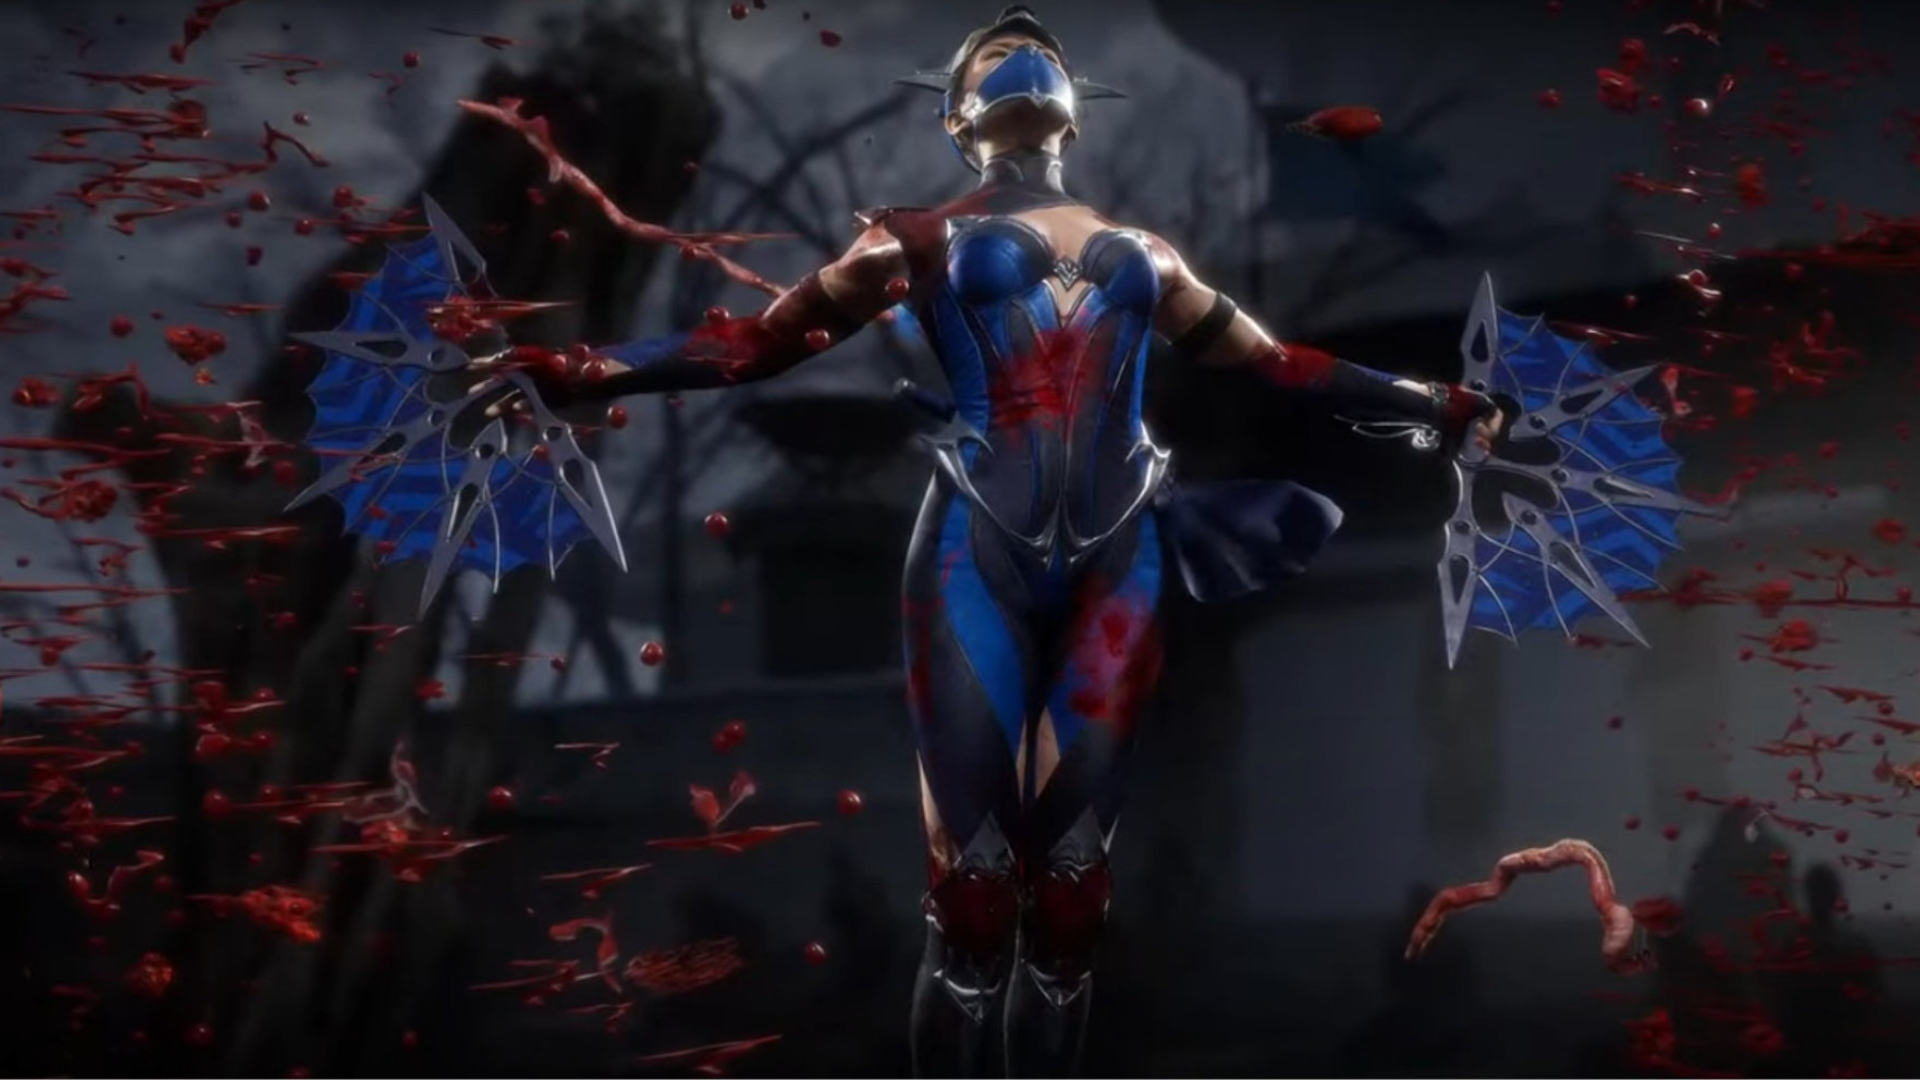 Mortal Kombat 11: How to Perform All of the Fatalities for Every